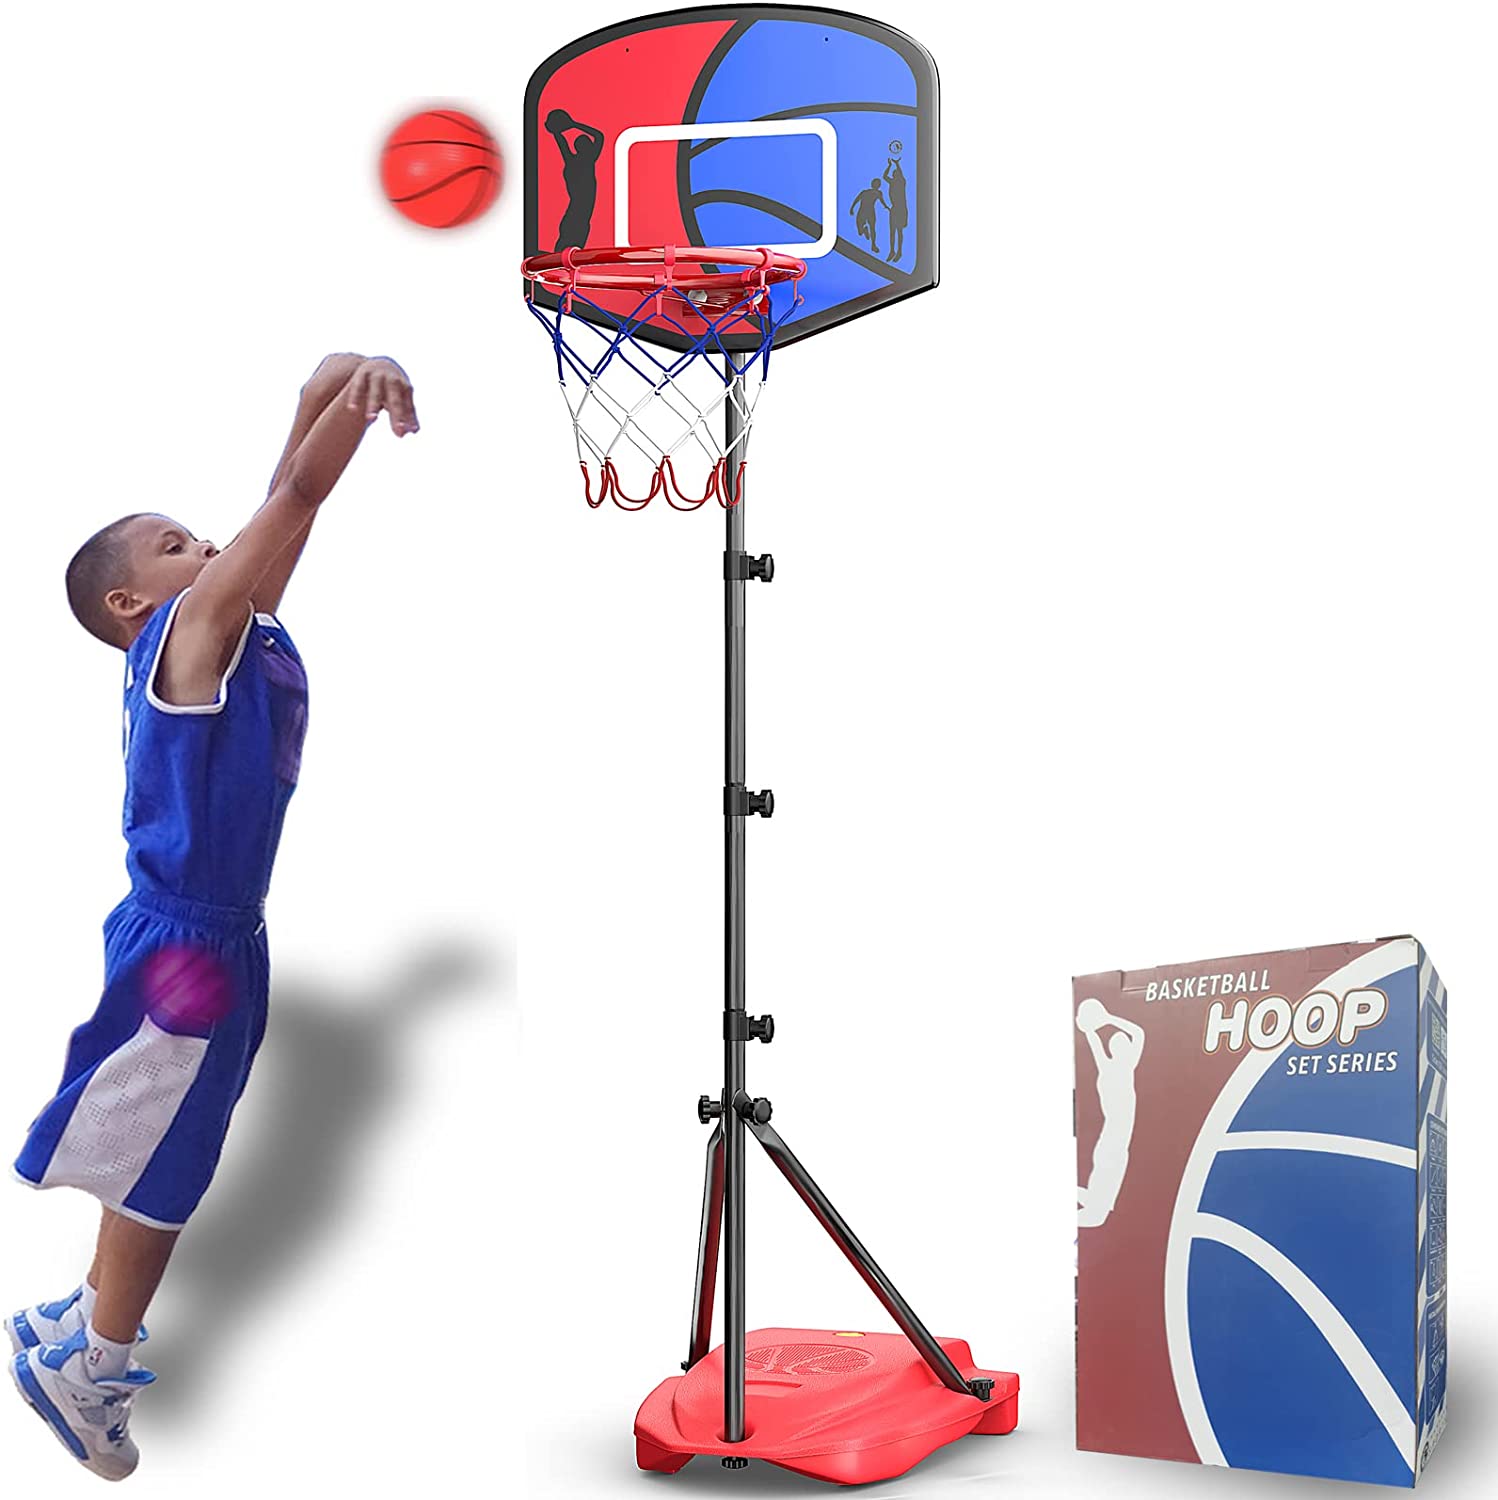 GLBS Indoor Lifting Multifunction Childrens Basketball Stand 360 ° Smooth Sanding Easy Installation Kids Basketball Hoop Toddler Toys for Age 1-8 Years Old